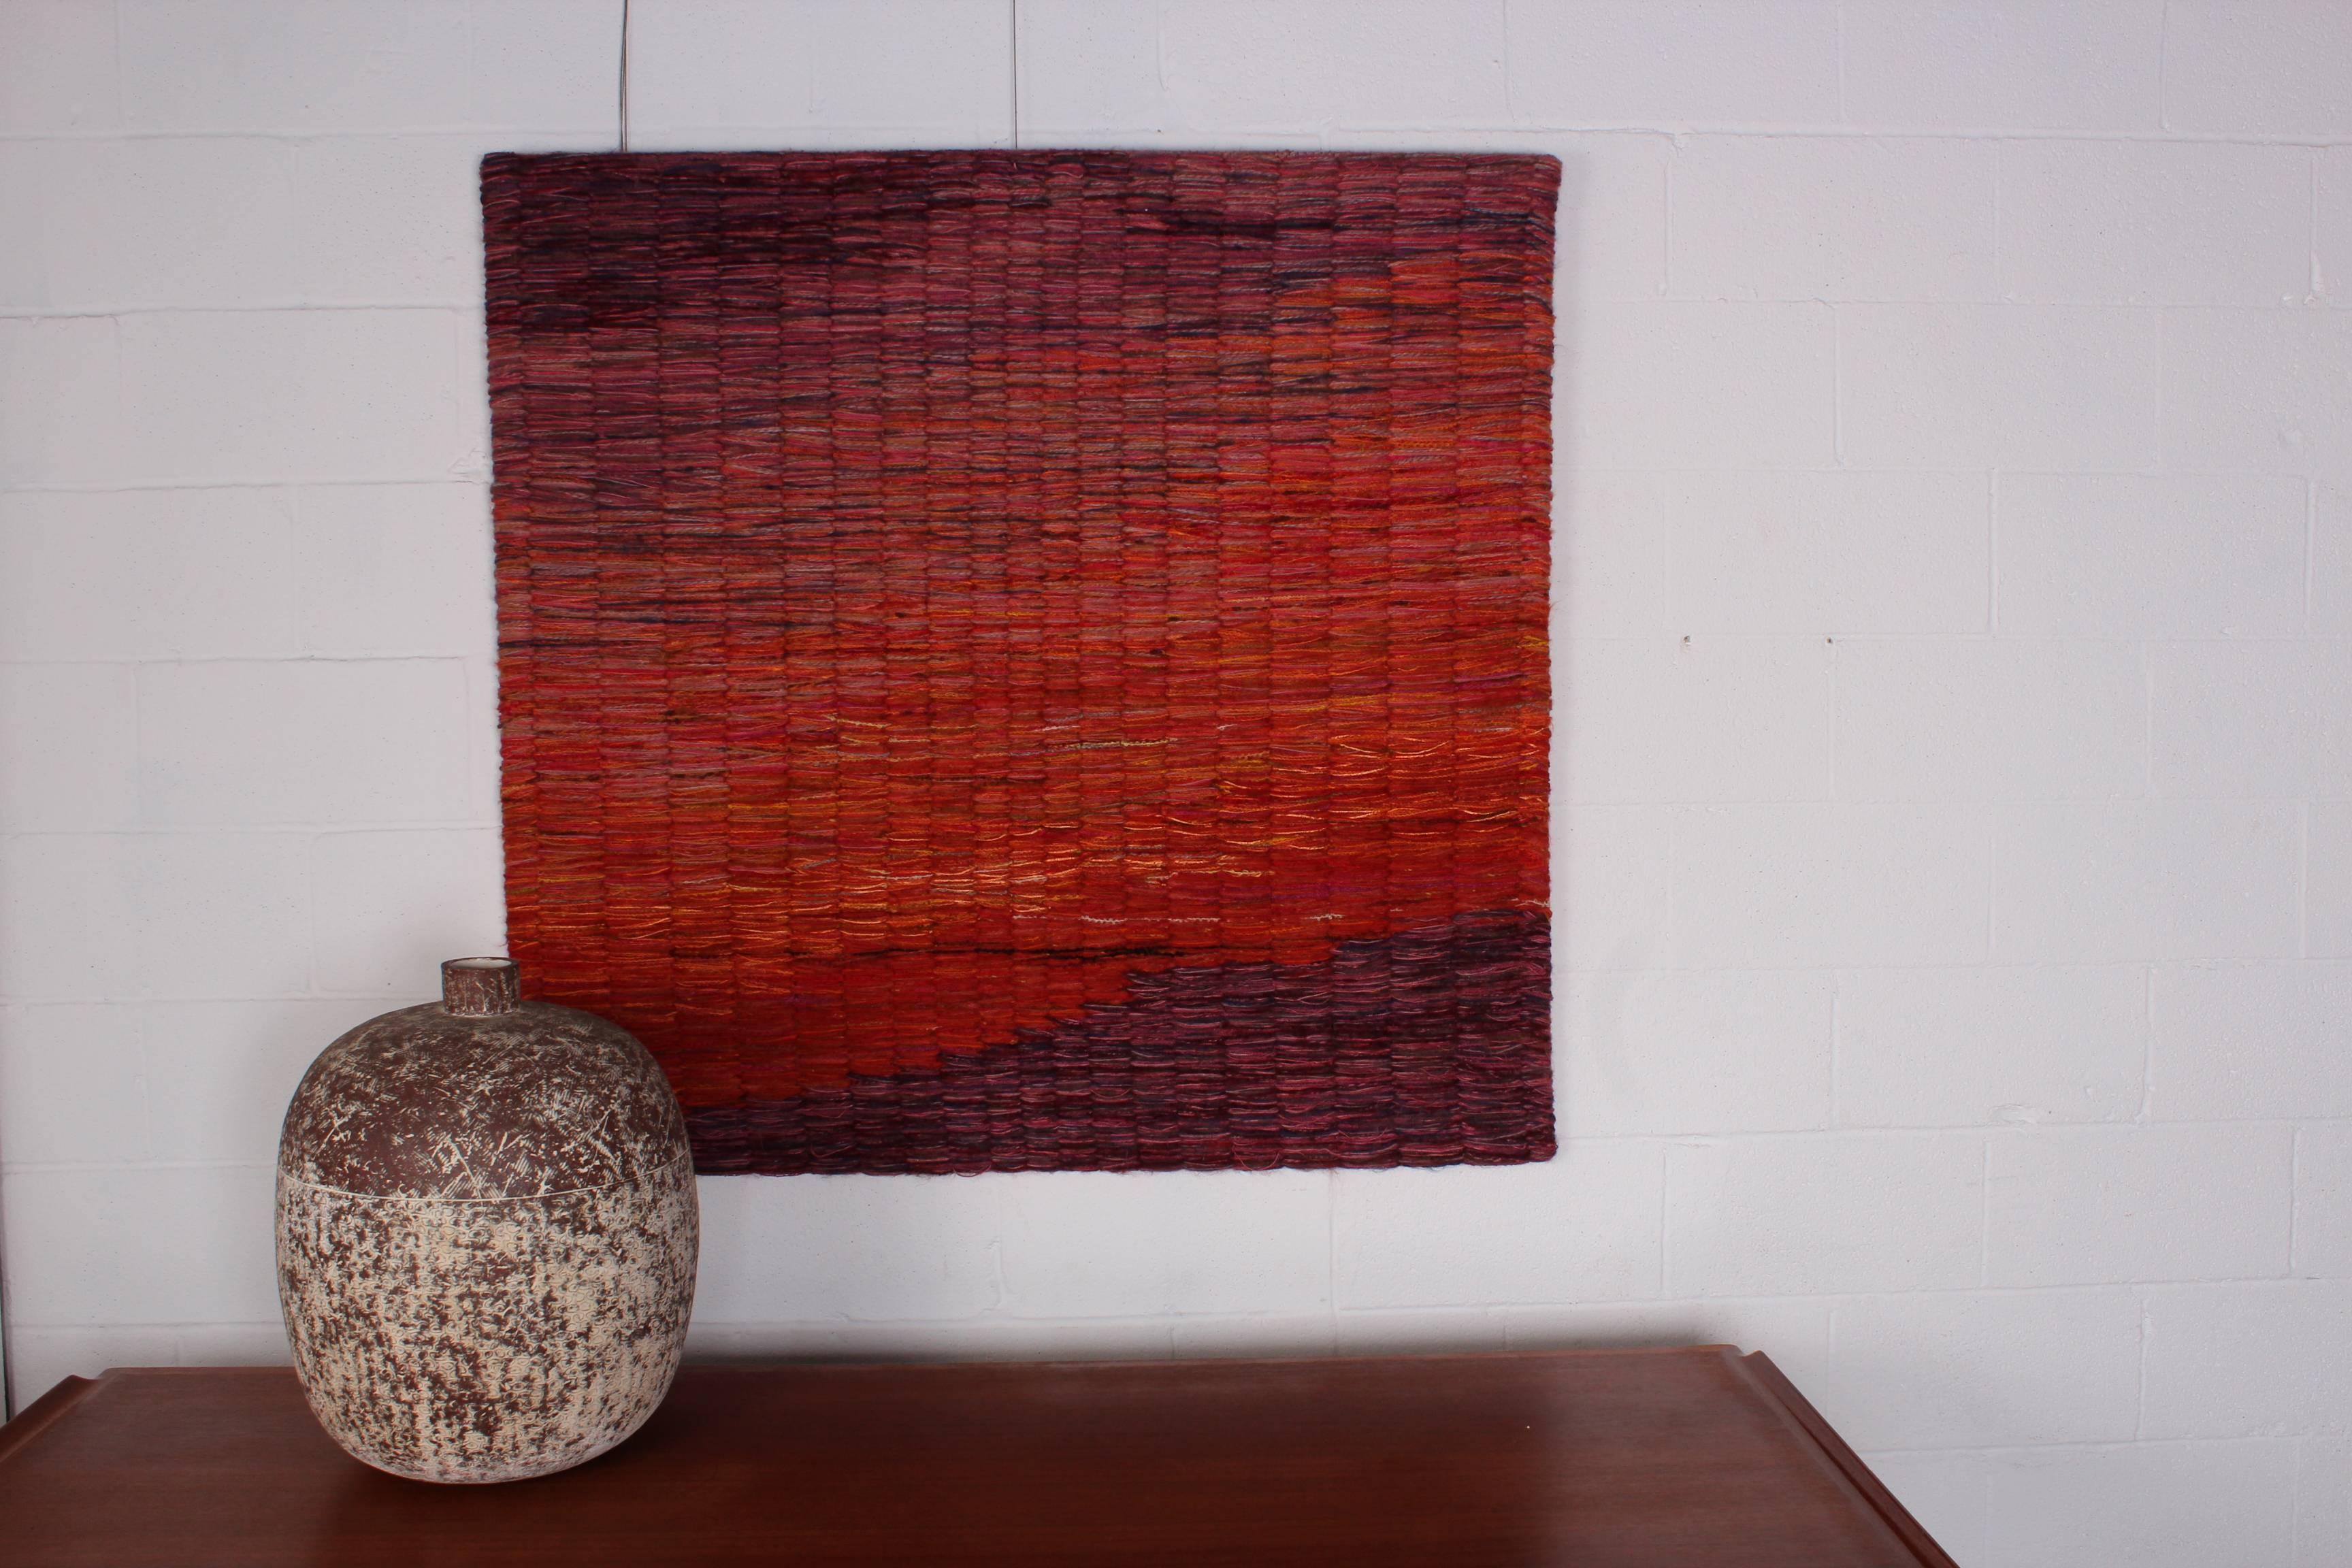 A large and complex weaving by Toni Ettenheim.